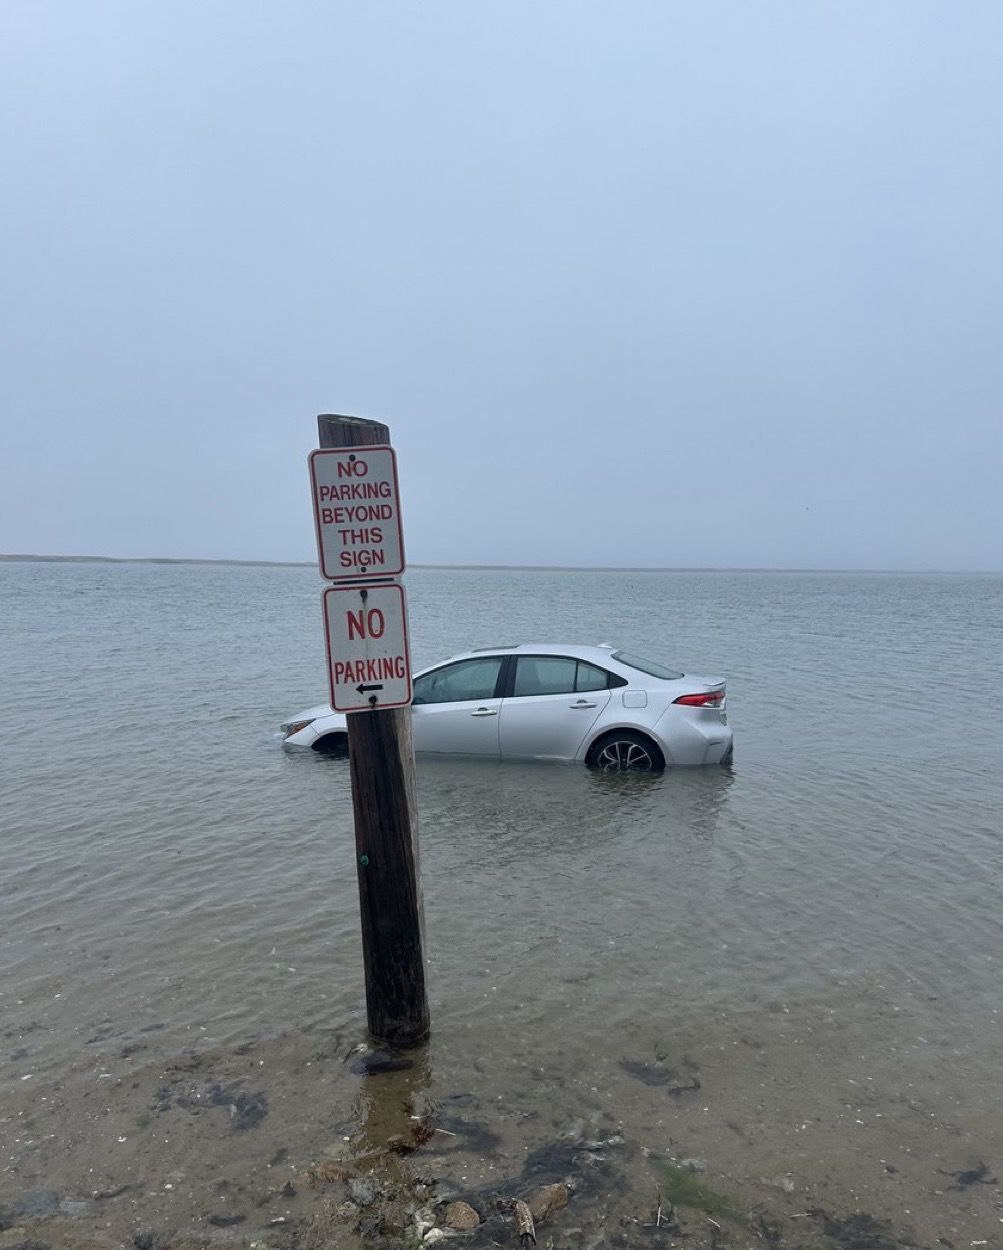 I thought we’d have floating cars by now…